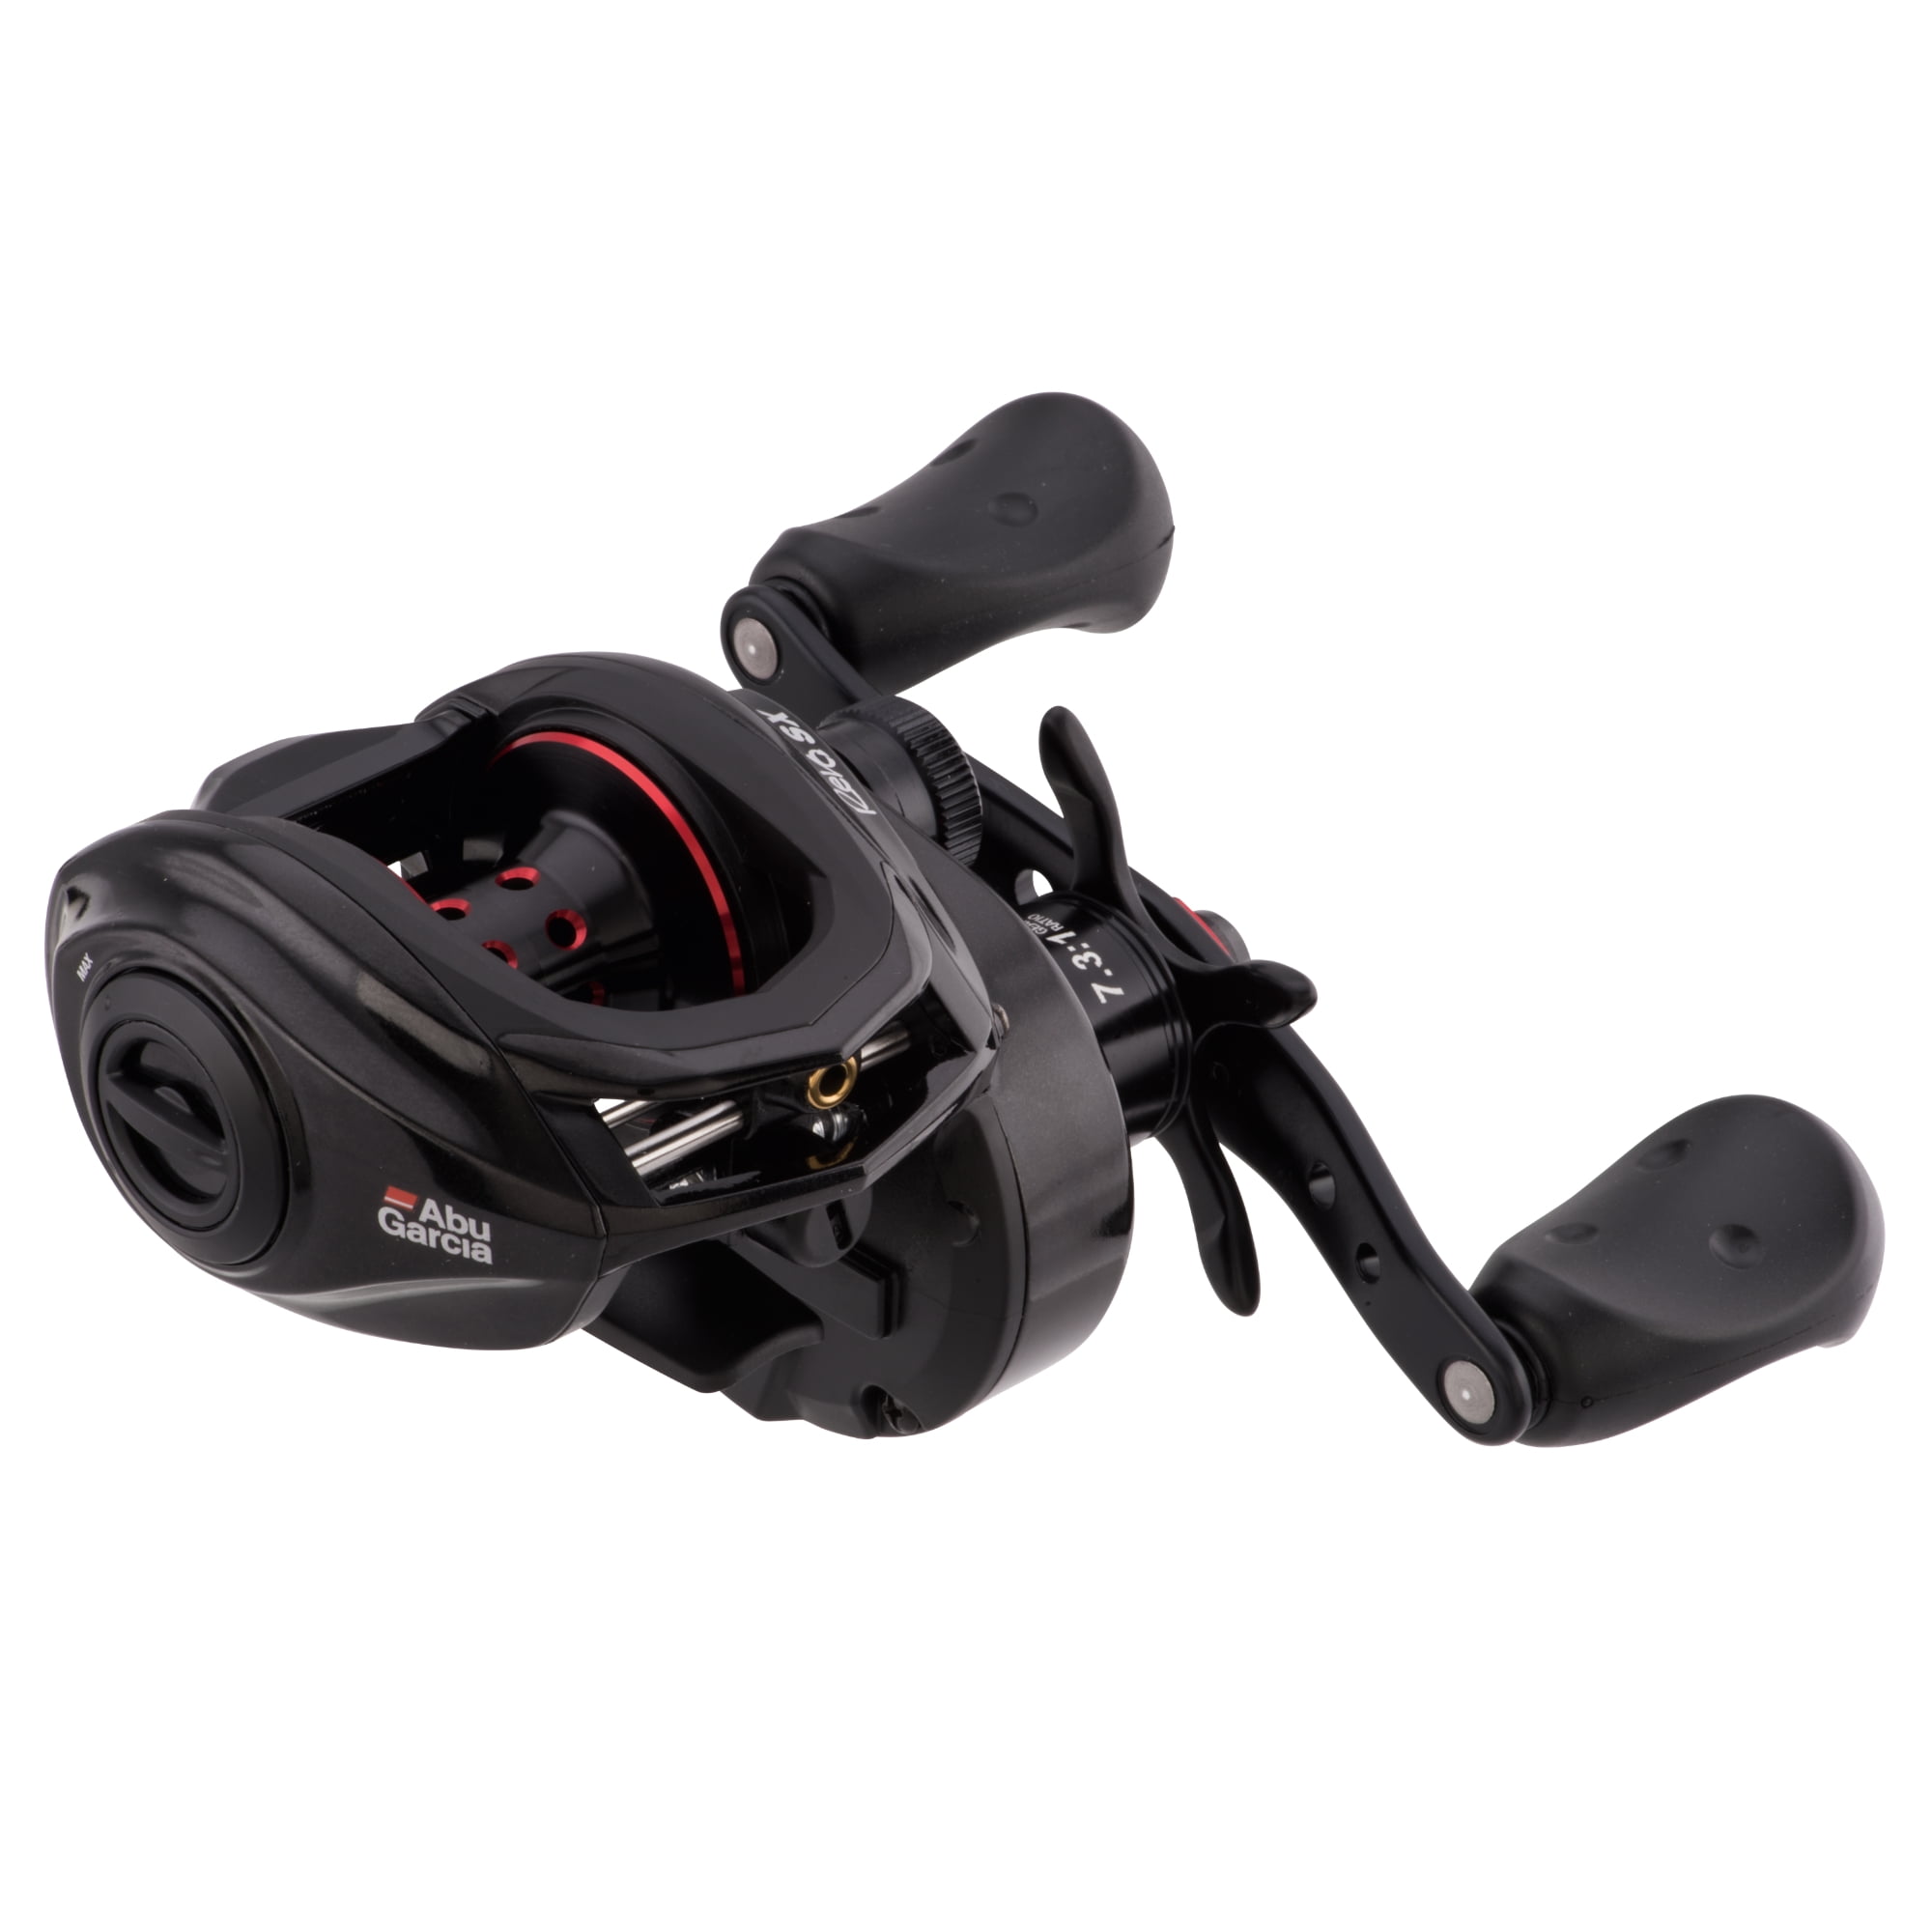 Abu Garcia bait reel Redmax Fune3 Fishing right handle New From Japan red max 